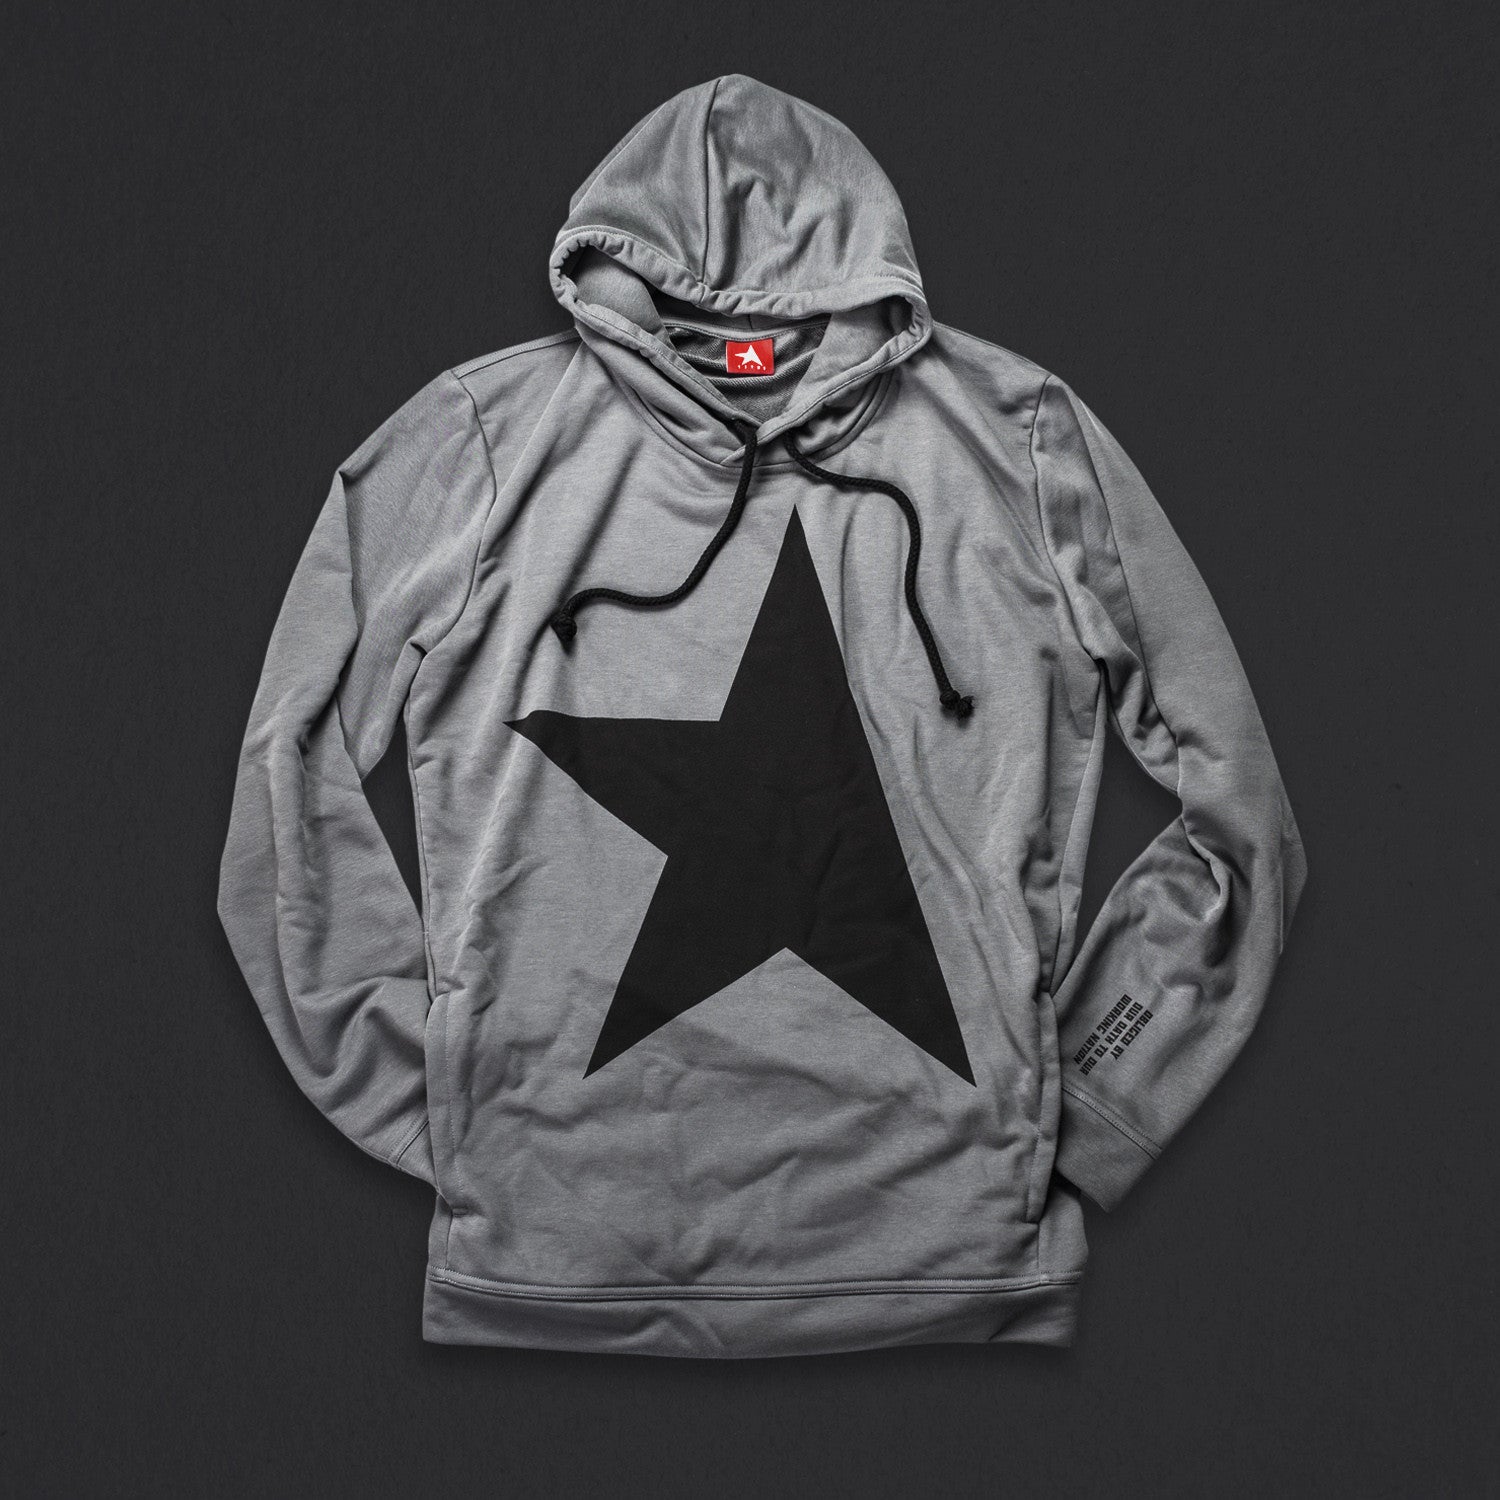 9th TITOS hoodie pewter/black with large star logo